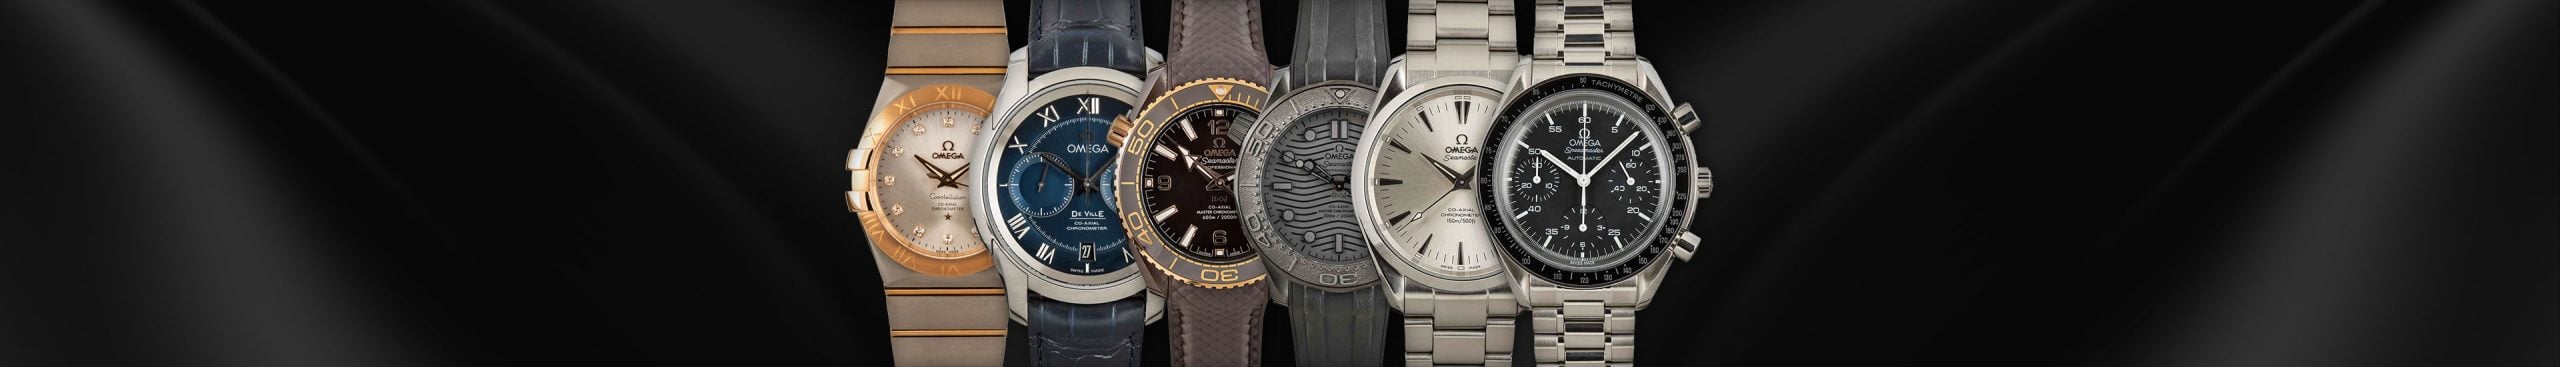 The best new watches in 2023 from Omega to Rolex, as selected by